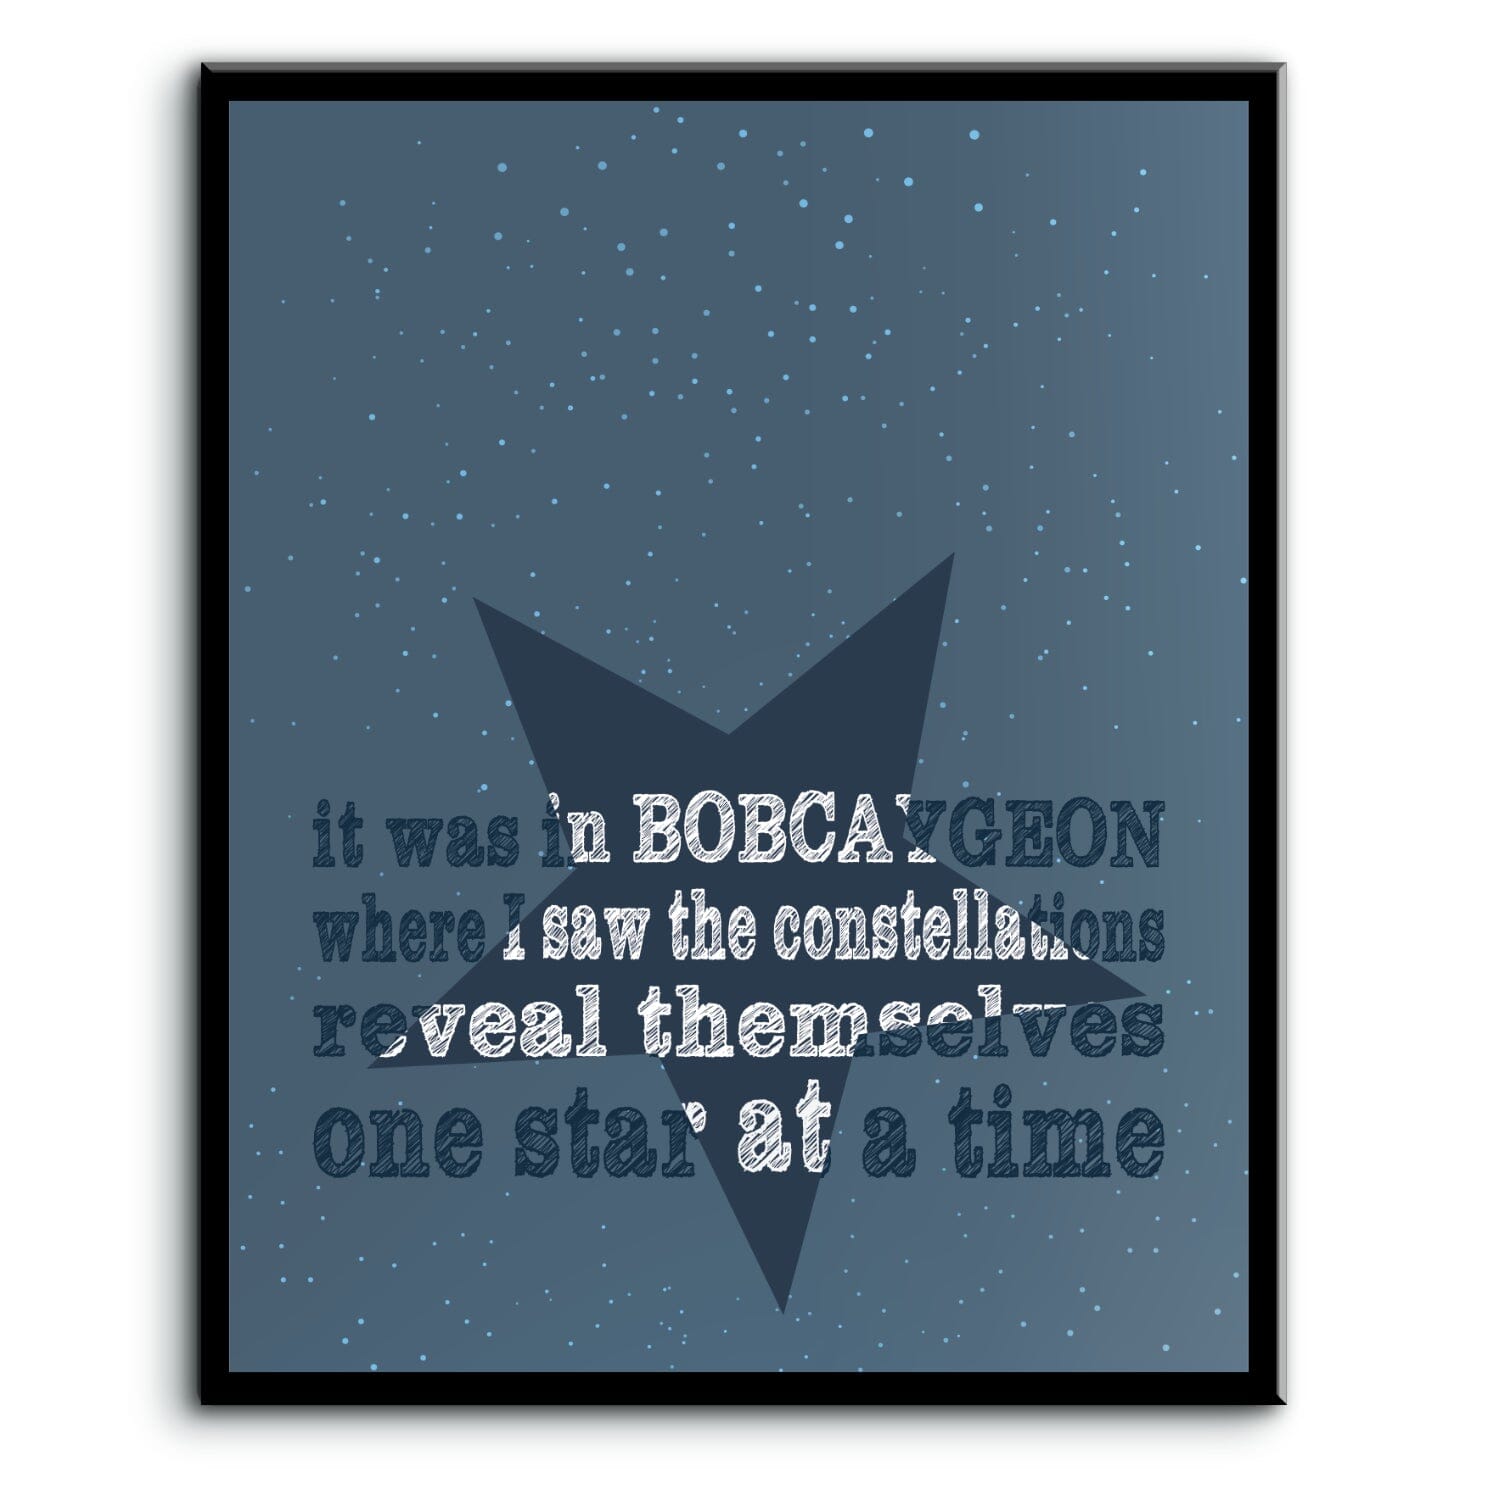 Bobcaygeon by Tragically Hip - Music Poster Song Lyric Art Song Lyrics Art Song Lyrics Art 8x10 Plaque Mount 